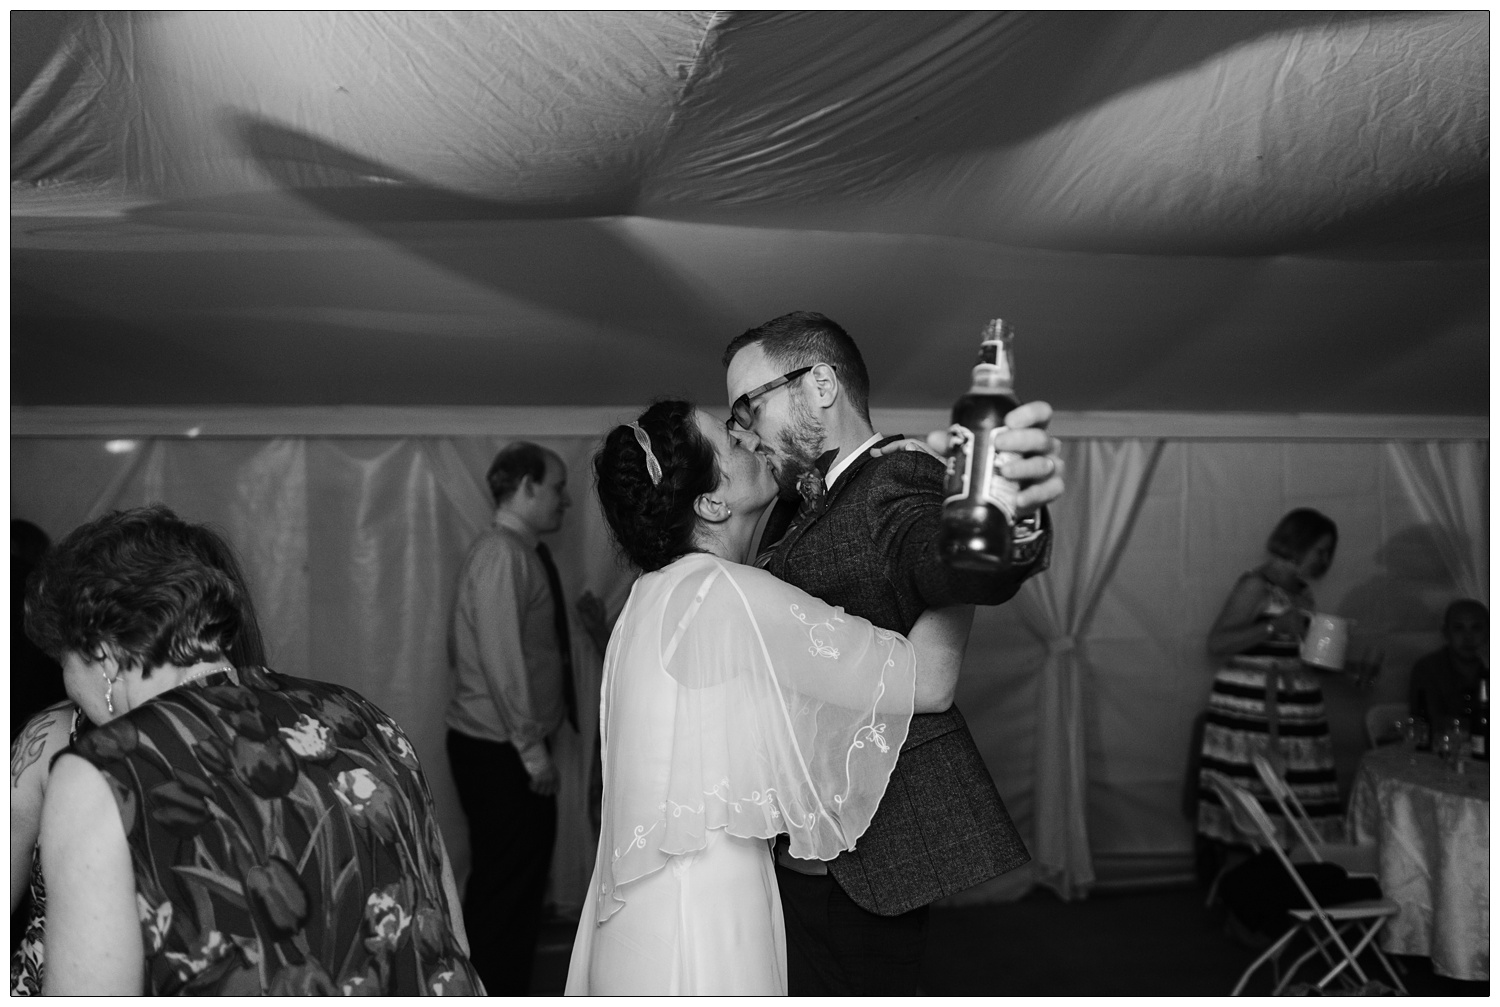 On the dance floor the bride kisses the groom as he holds out his bottle of Tangle Foot beer.